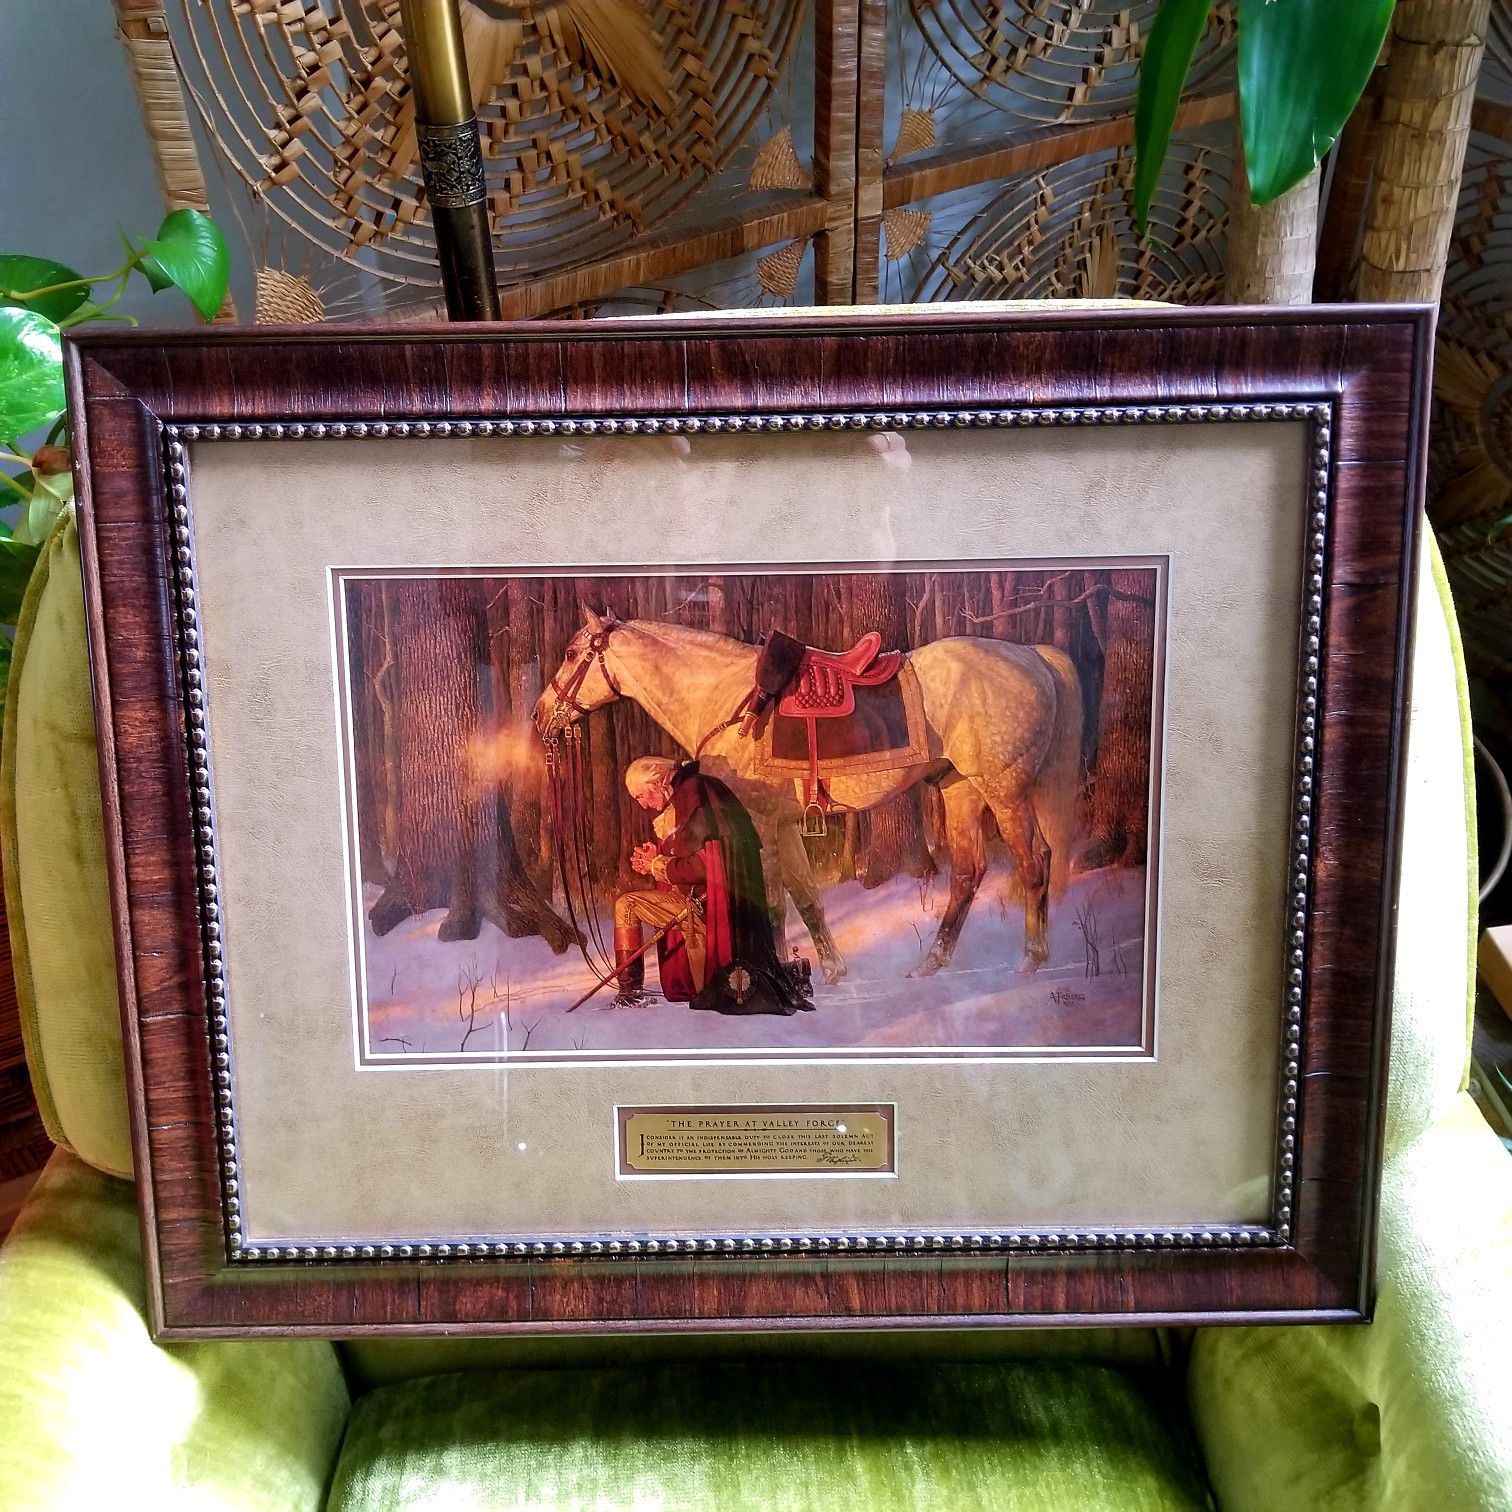 Friberg Fine Artwork Print The Prayer at Valley Forge History Wall Hanging Frame